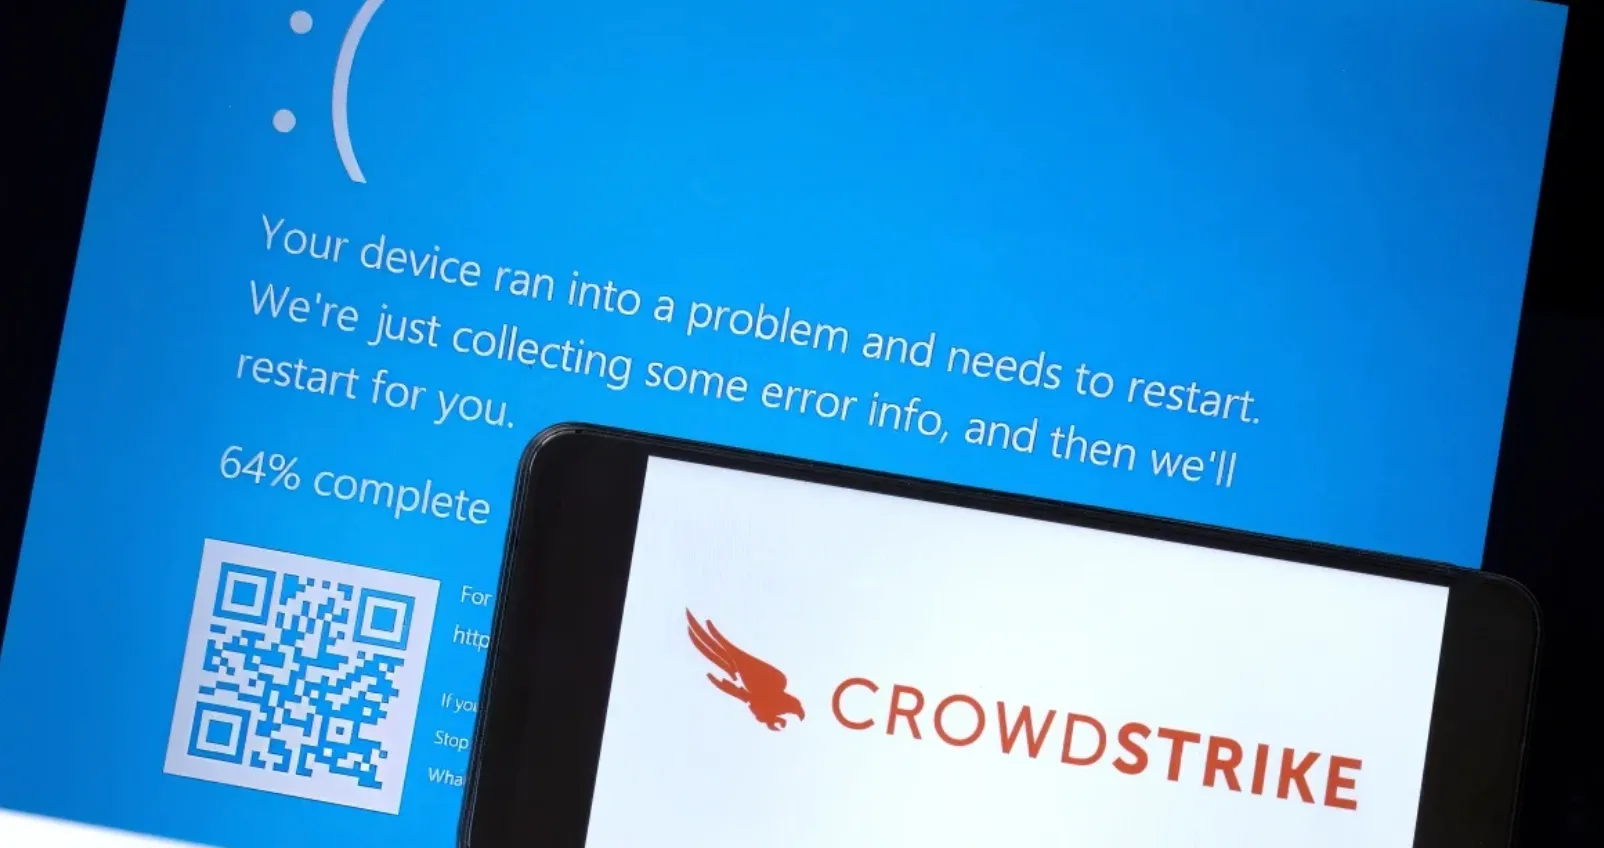 CrowdStrike: The Company Behind the Major Microsoft Outage